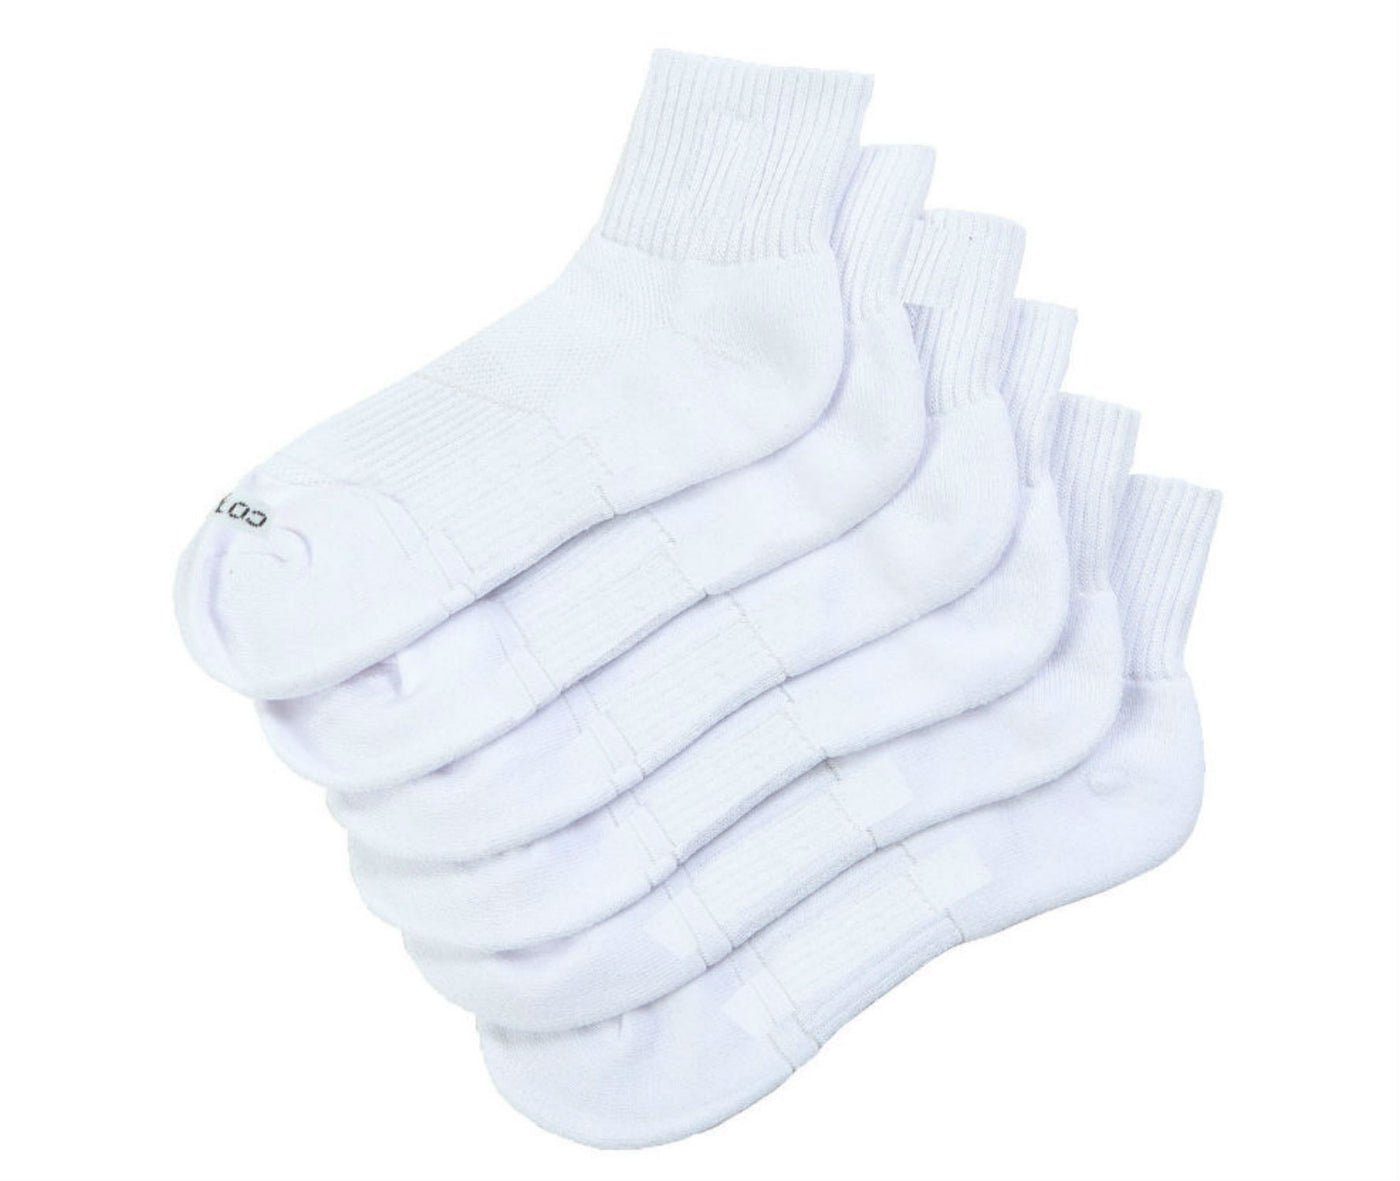 Foot Frenzy: Husskinz Men's Ankle Length Socks — Where Style Meets  Insanity!”, by RICHWORLDBRANDS